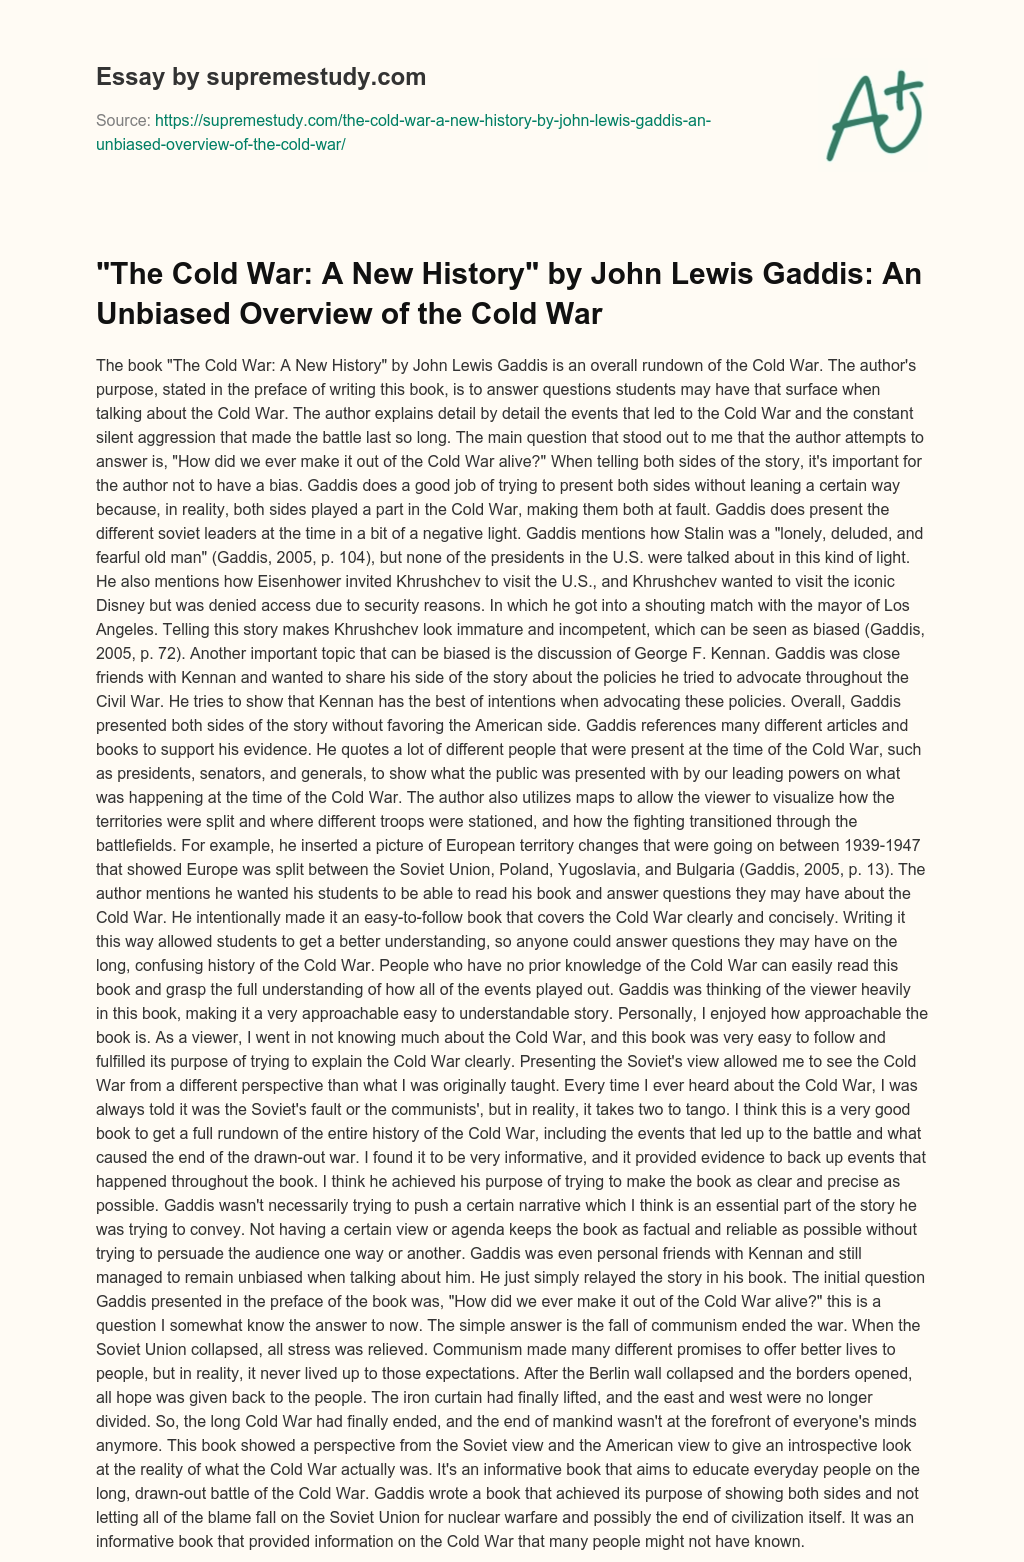 “The Cold War: A New History” by John Lewis Gaddis: An Unbiased Overview of the Cold War essay